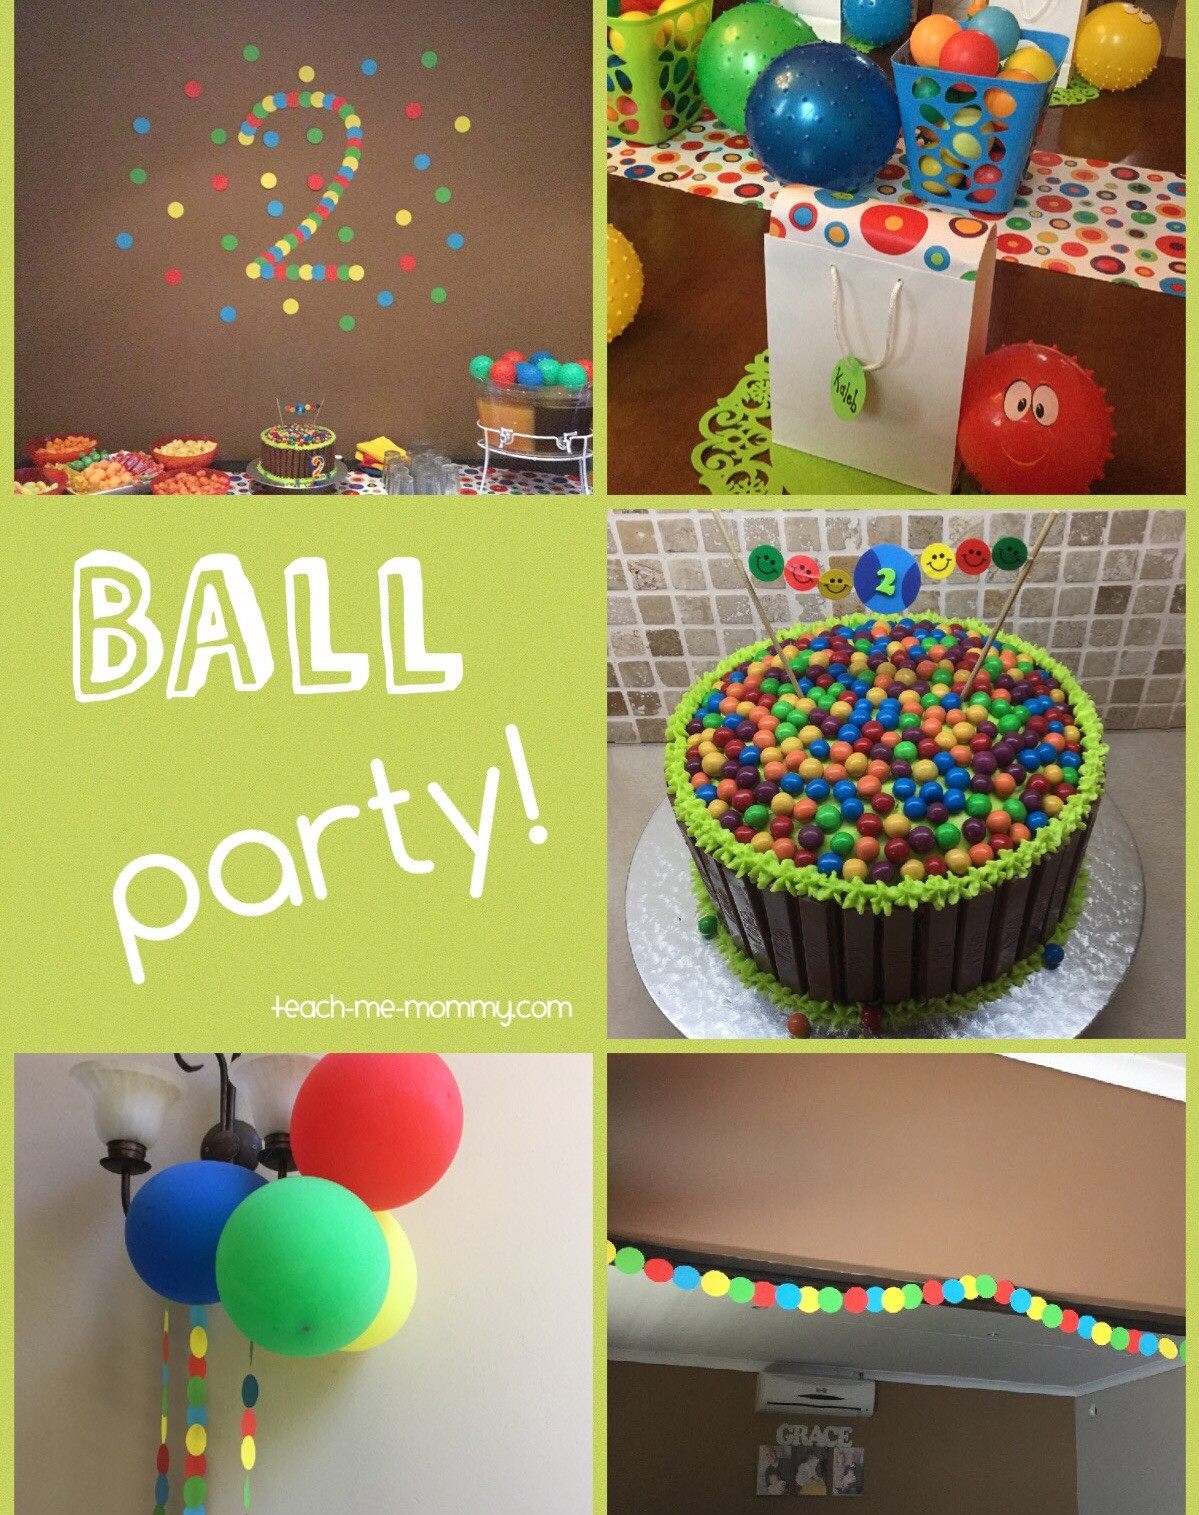 2 Year Old Birthday Party Themes
 Ball Themed Party for a 2 Year Old Teach Me Mommy